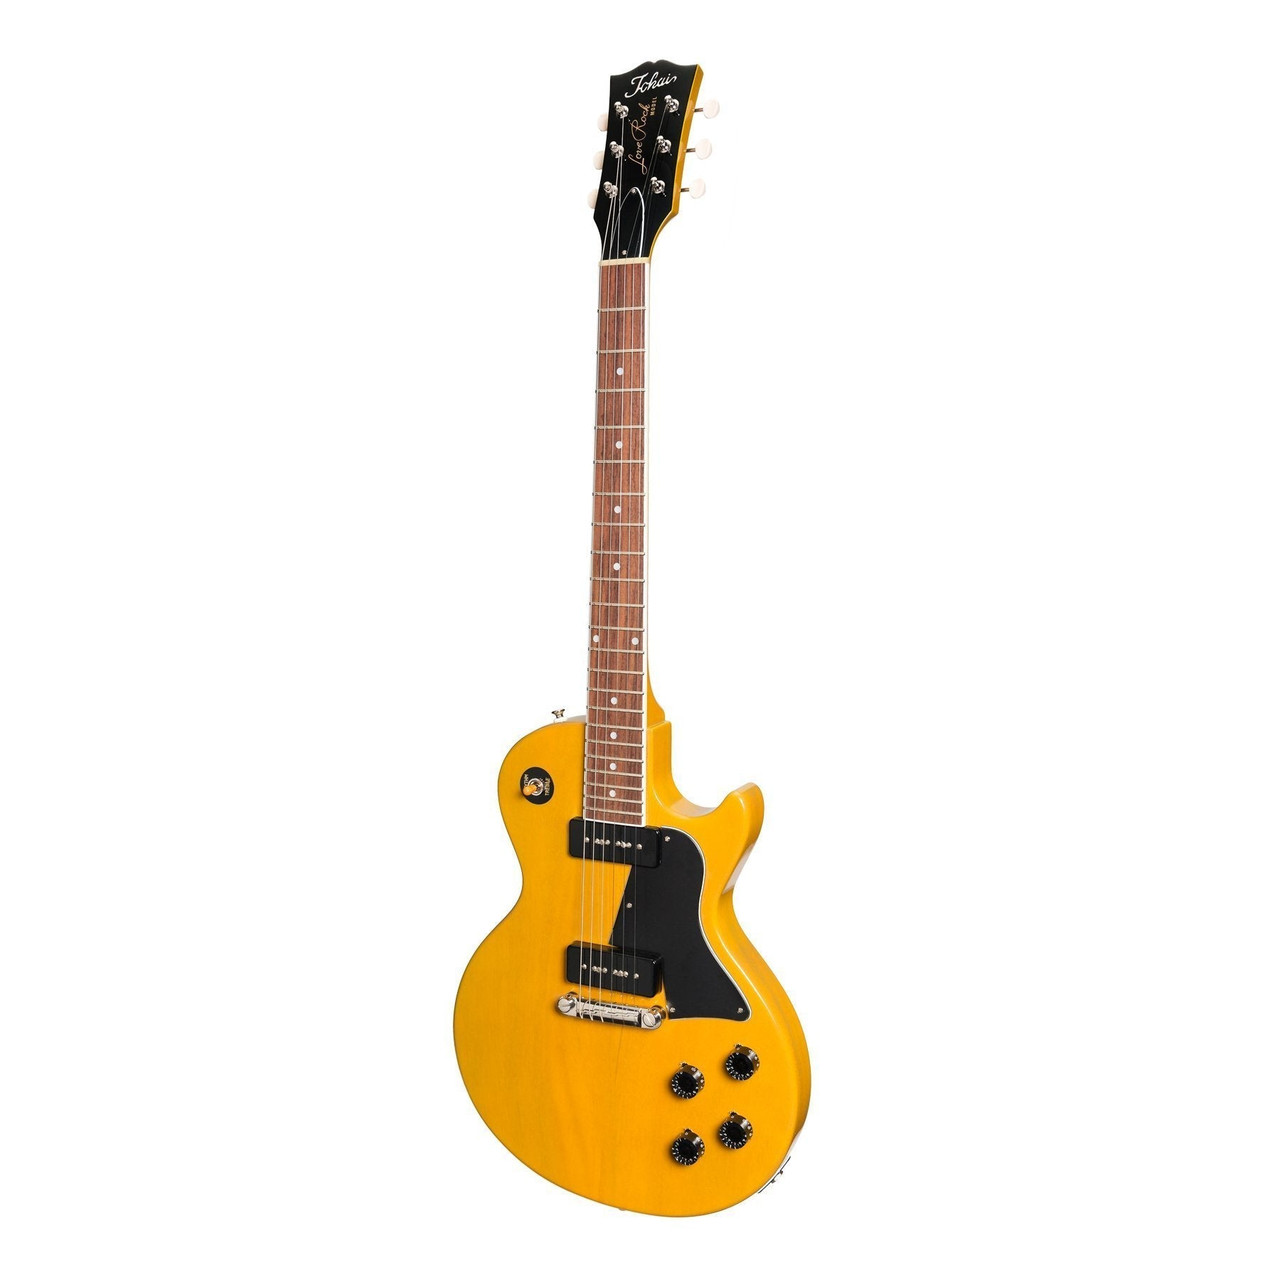 Tokai 'Vintage Series' LSS-124 LPS-Style Electric Guitar (See Through Yellow)